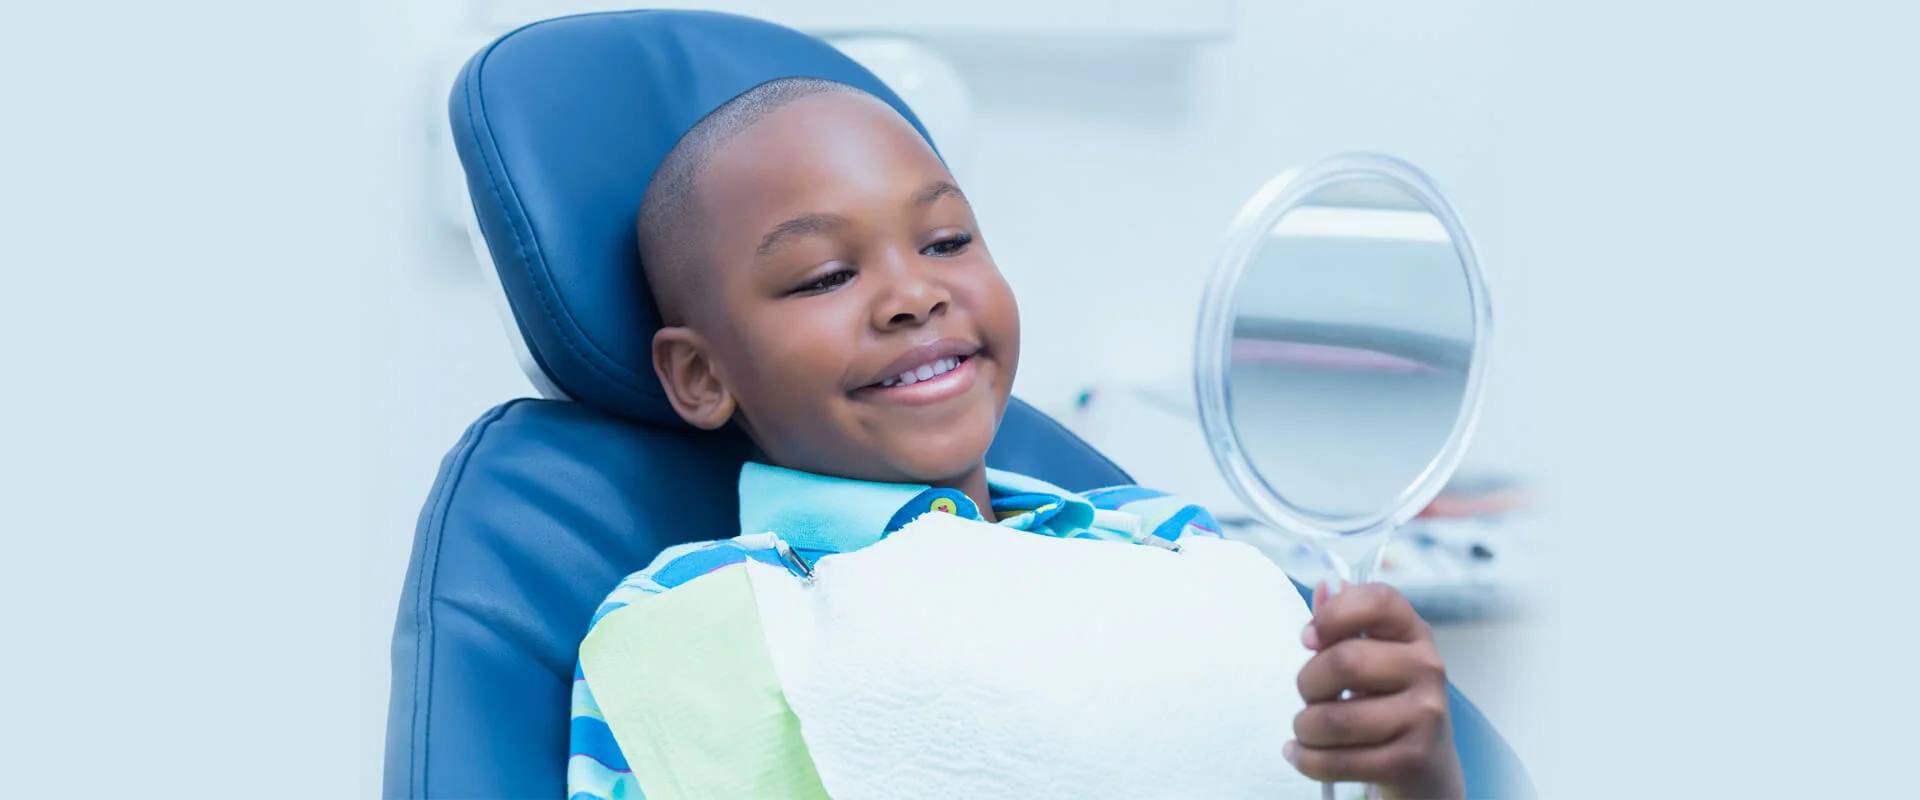 Children Special, $59 New Patient Exam, X-Ray & Cleaning